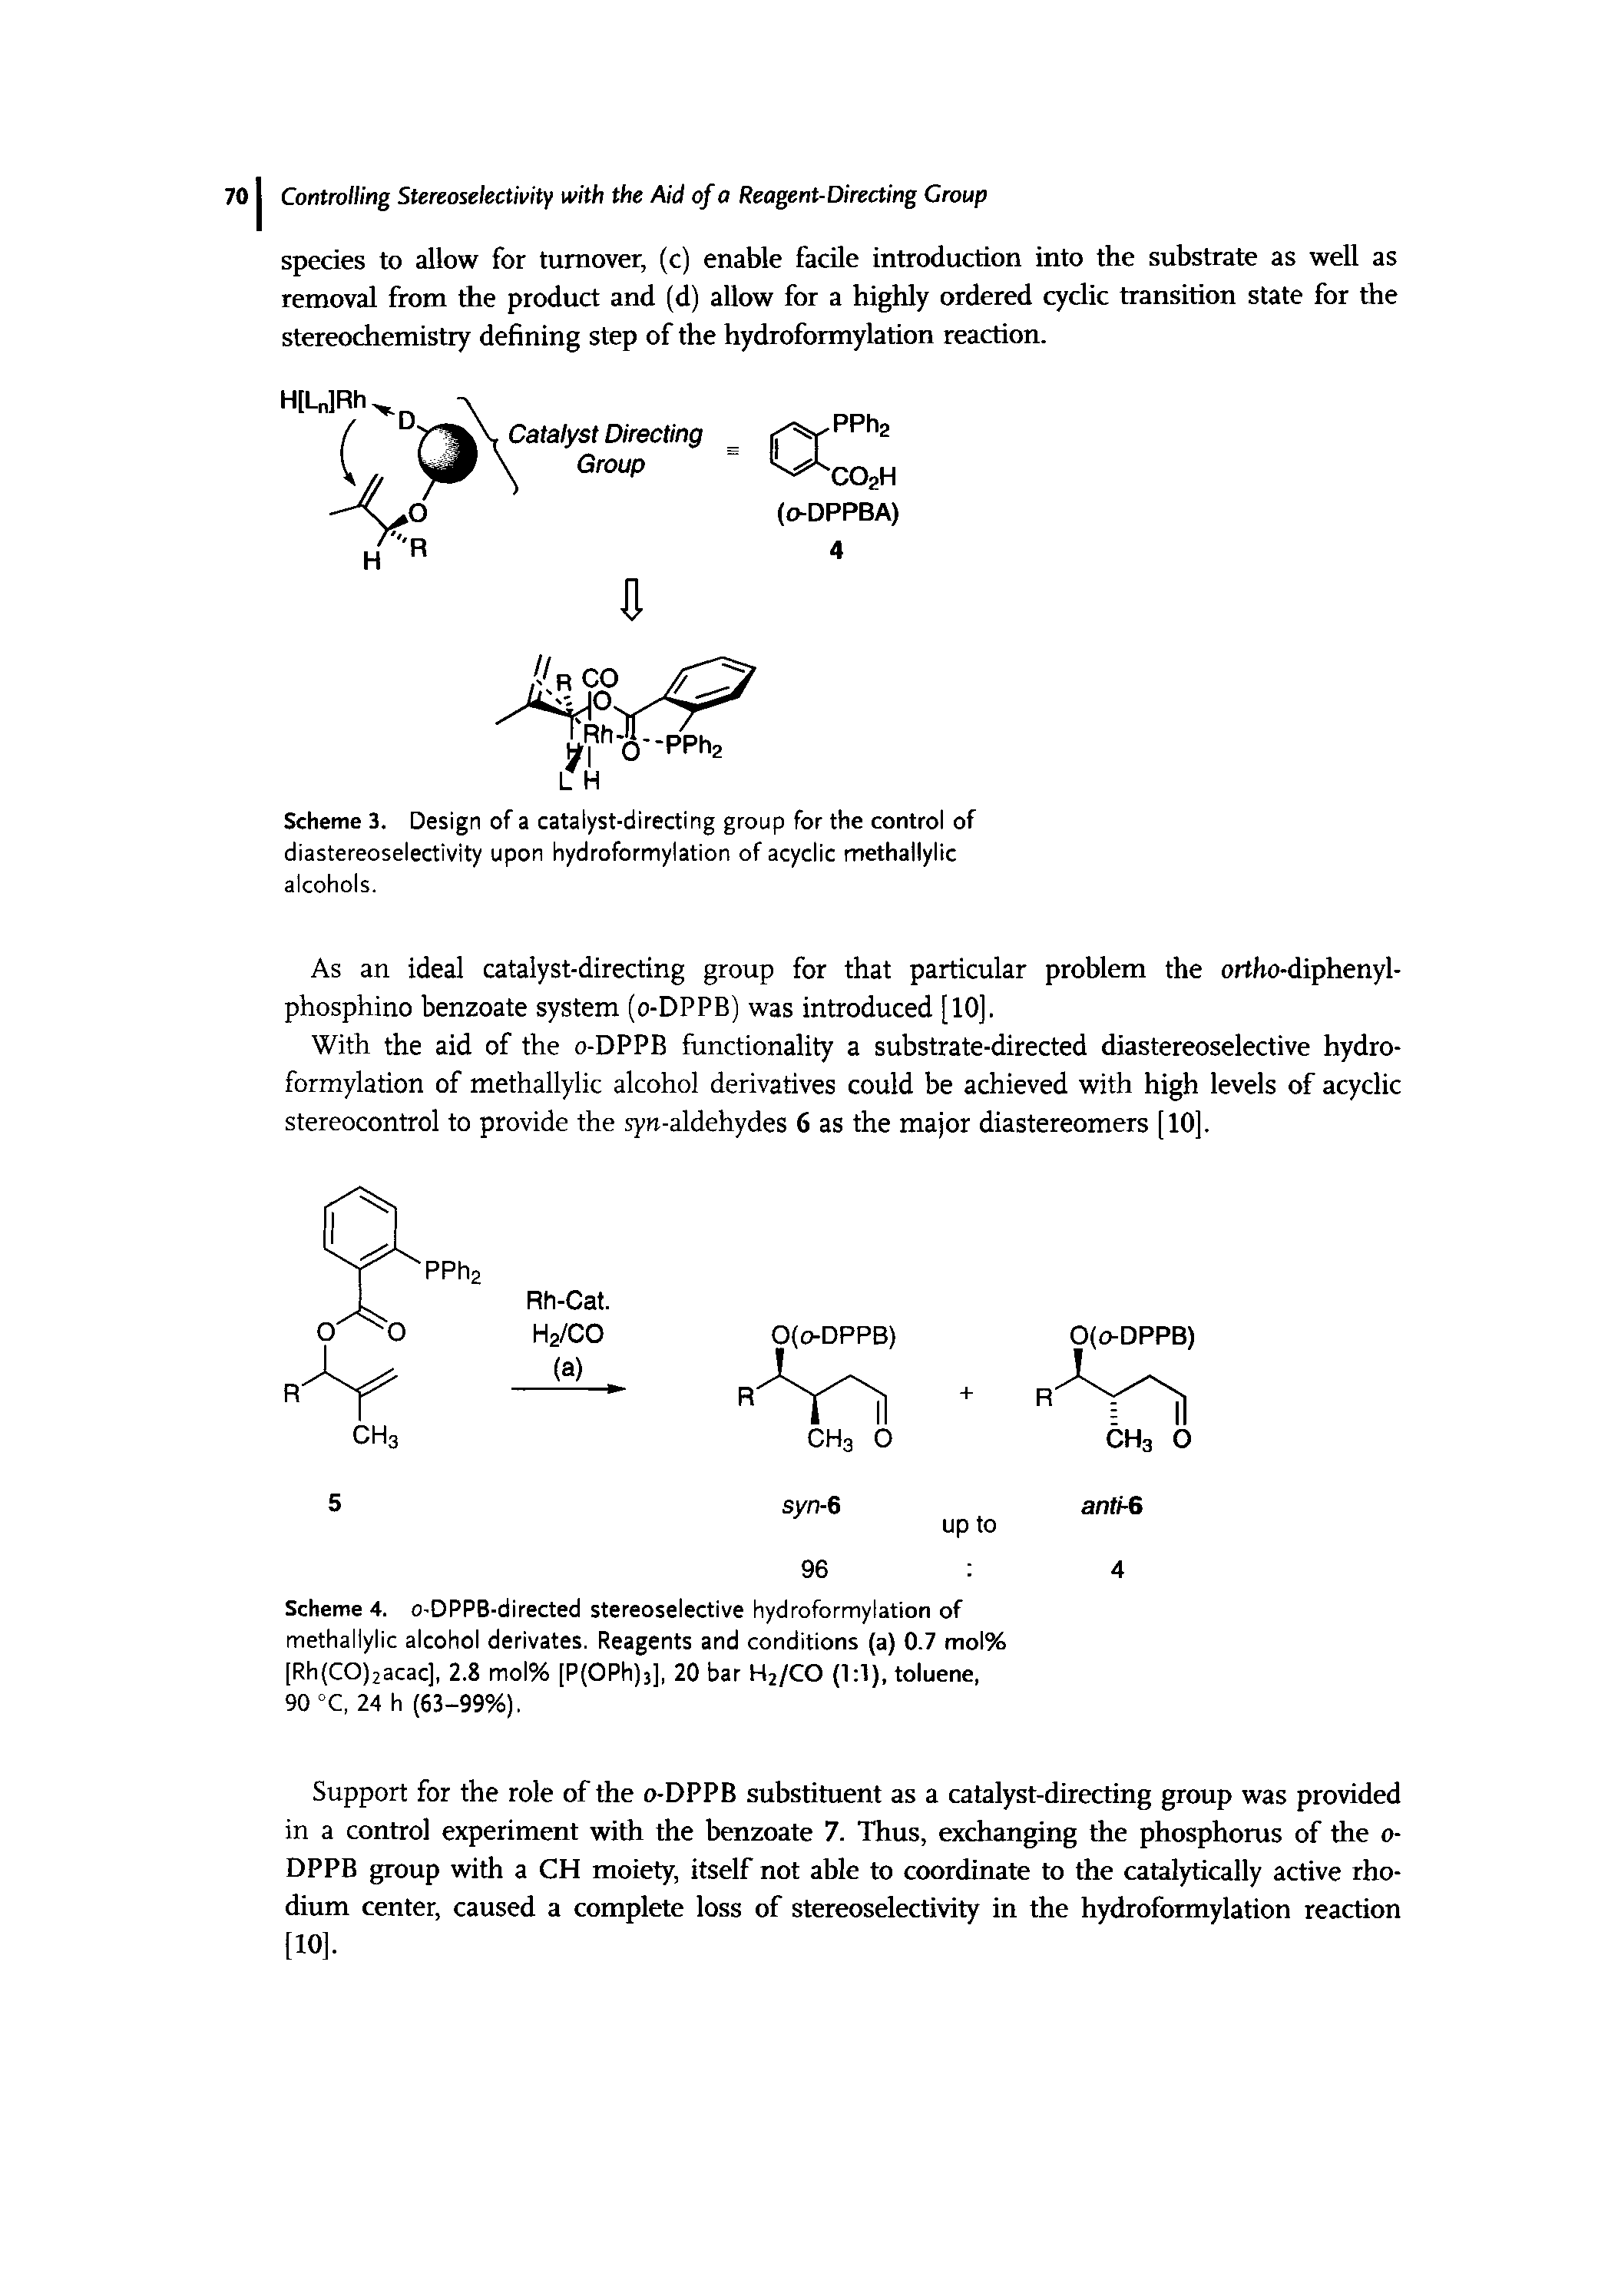 Scheme 3. Design of a catalyst-directing group for the control of diastereoselectivity upon hydroformylation of acyclic methallylic alcohols.